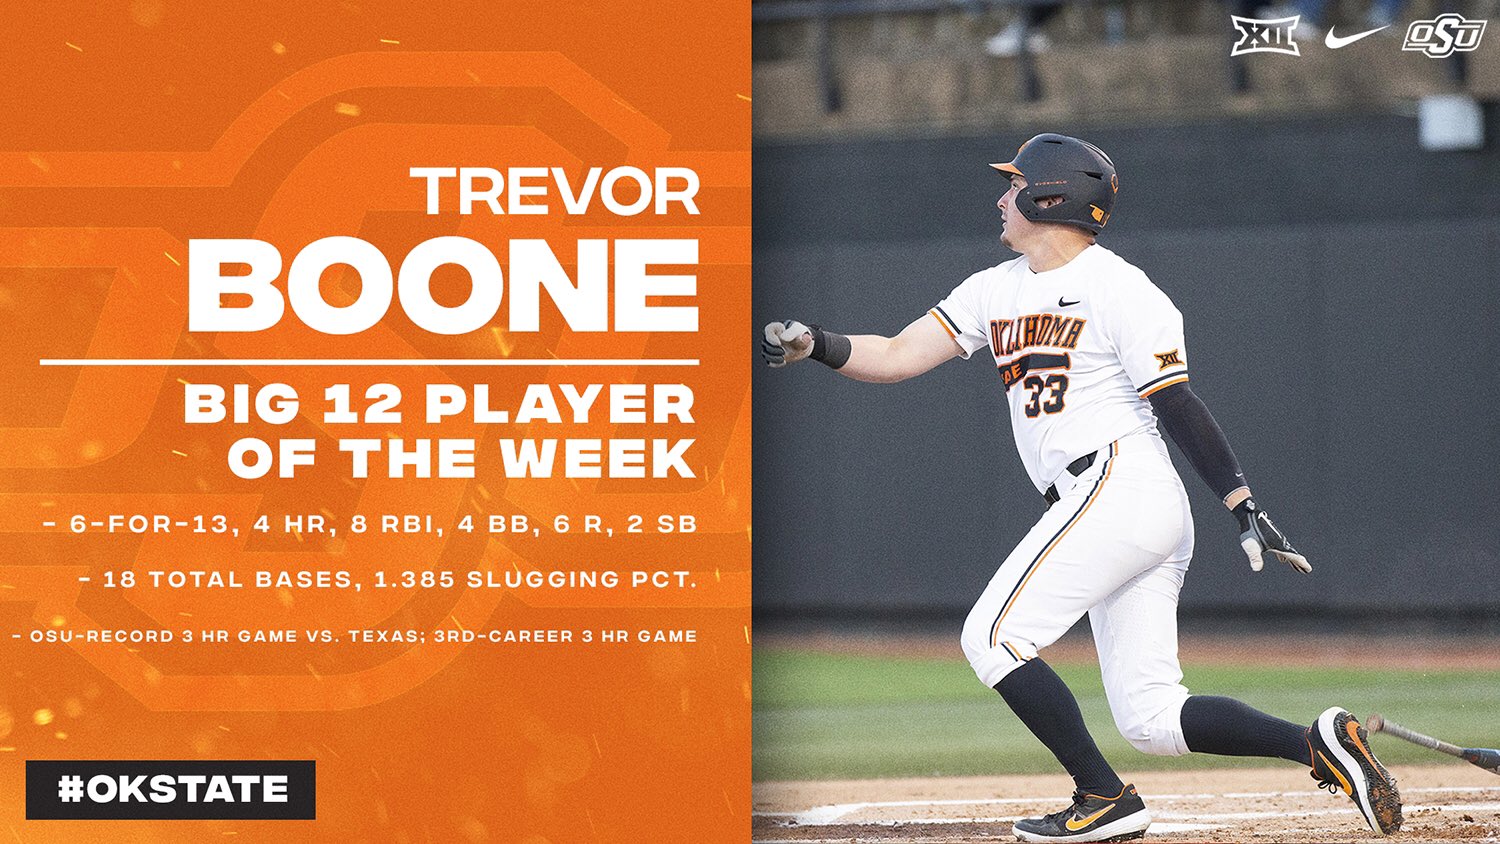 Oklahoma State’s Trevor Boone (Osage Tribe) is the Big 12 Conference Baseball Player of the Week